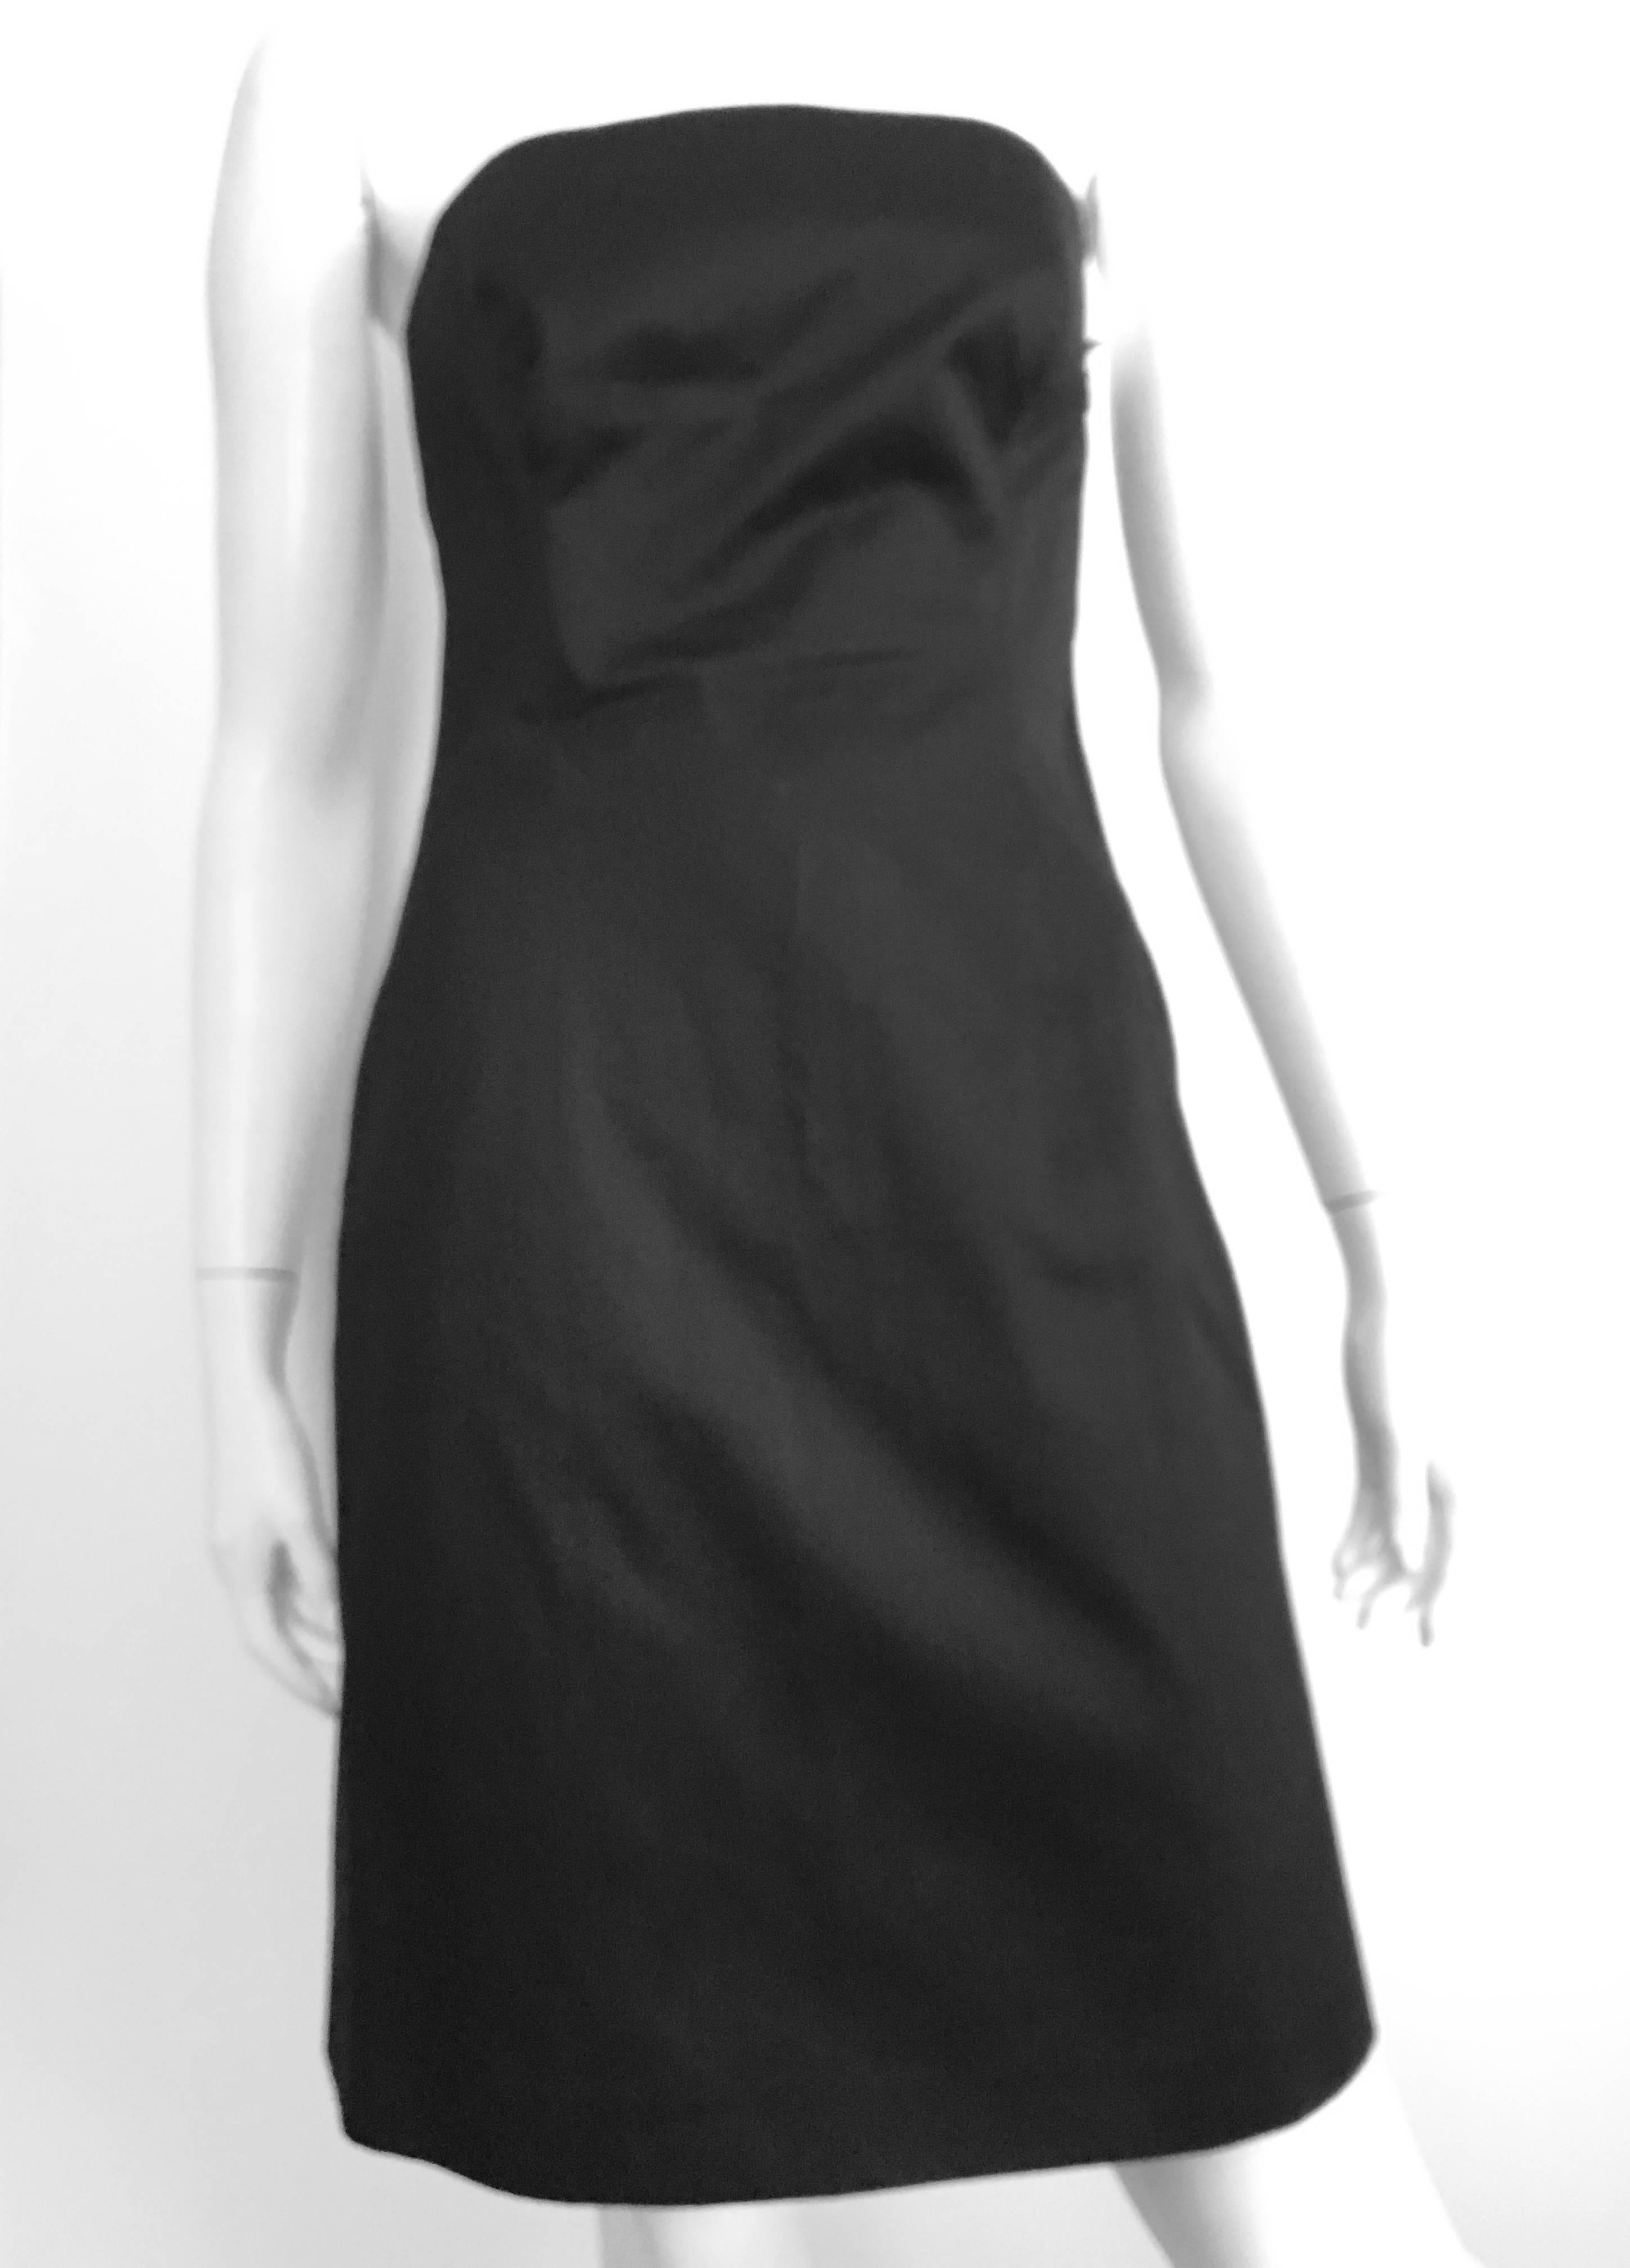 Kors by Michael Kors strapless cotton black evening cocktail dress is labeled a size 4 but fits more like a size 6. The waist on this piece is 29.1/2" it is borderline between size 4 & 6.  Ladies if you are a size 4 please grab your tape